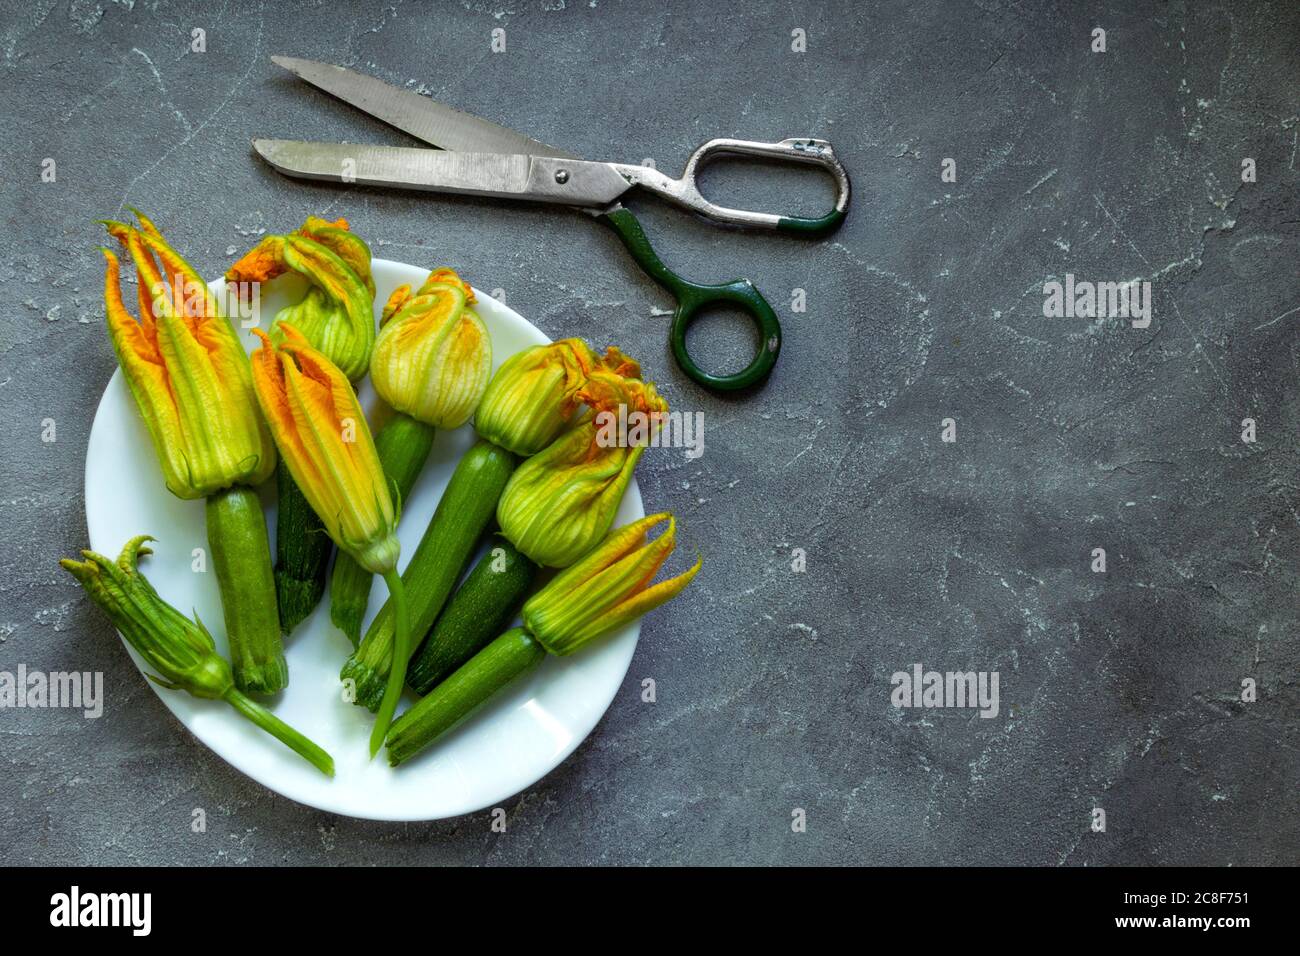 Zucchini flowers and scissors on the grey background. Flat lay, copy space Stock Photo